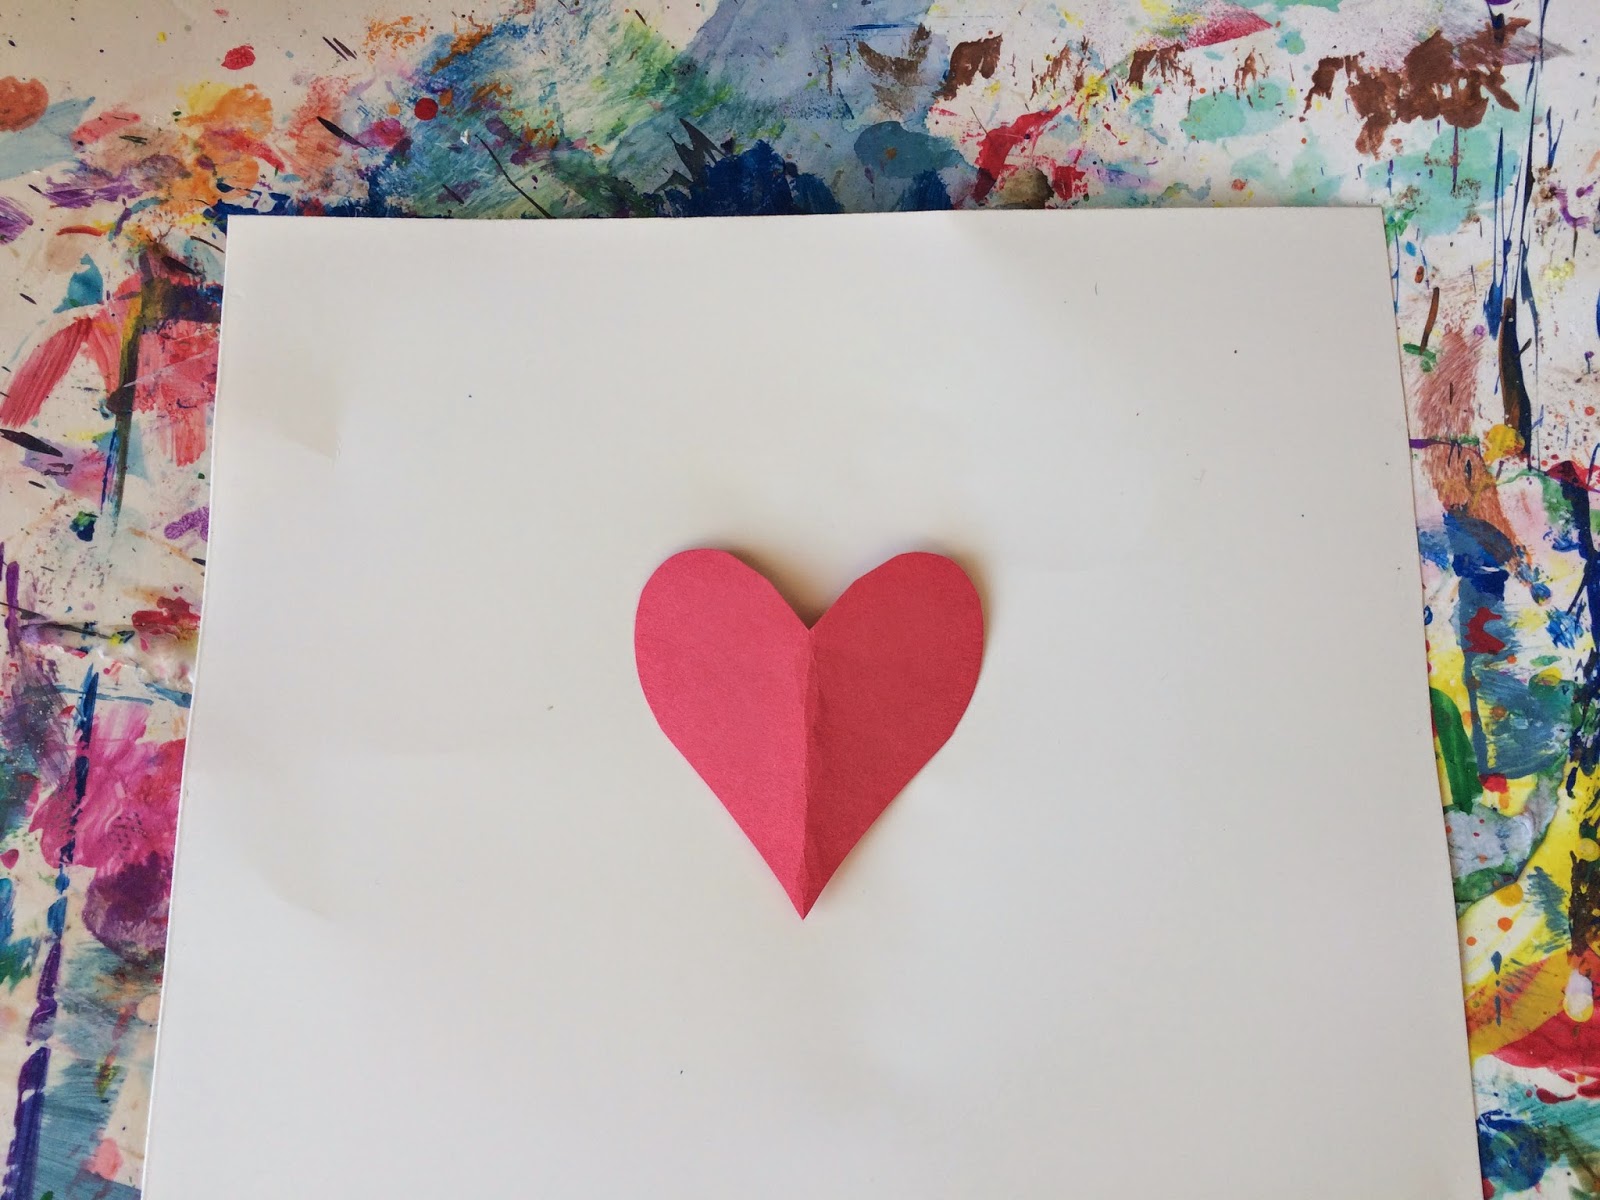 DIY Glitter Puffy Paint to Make Valentine's Day Hearts - FSPDT